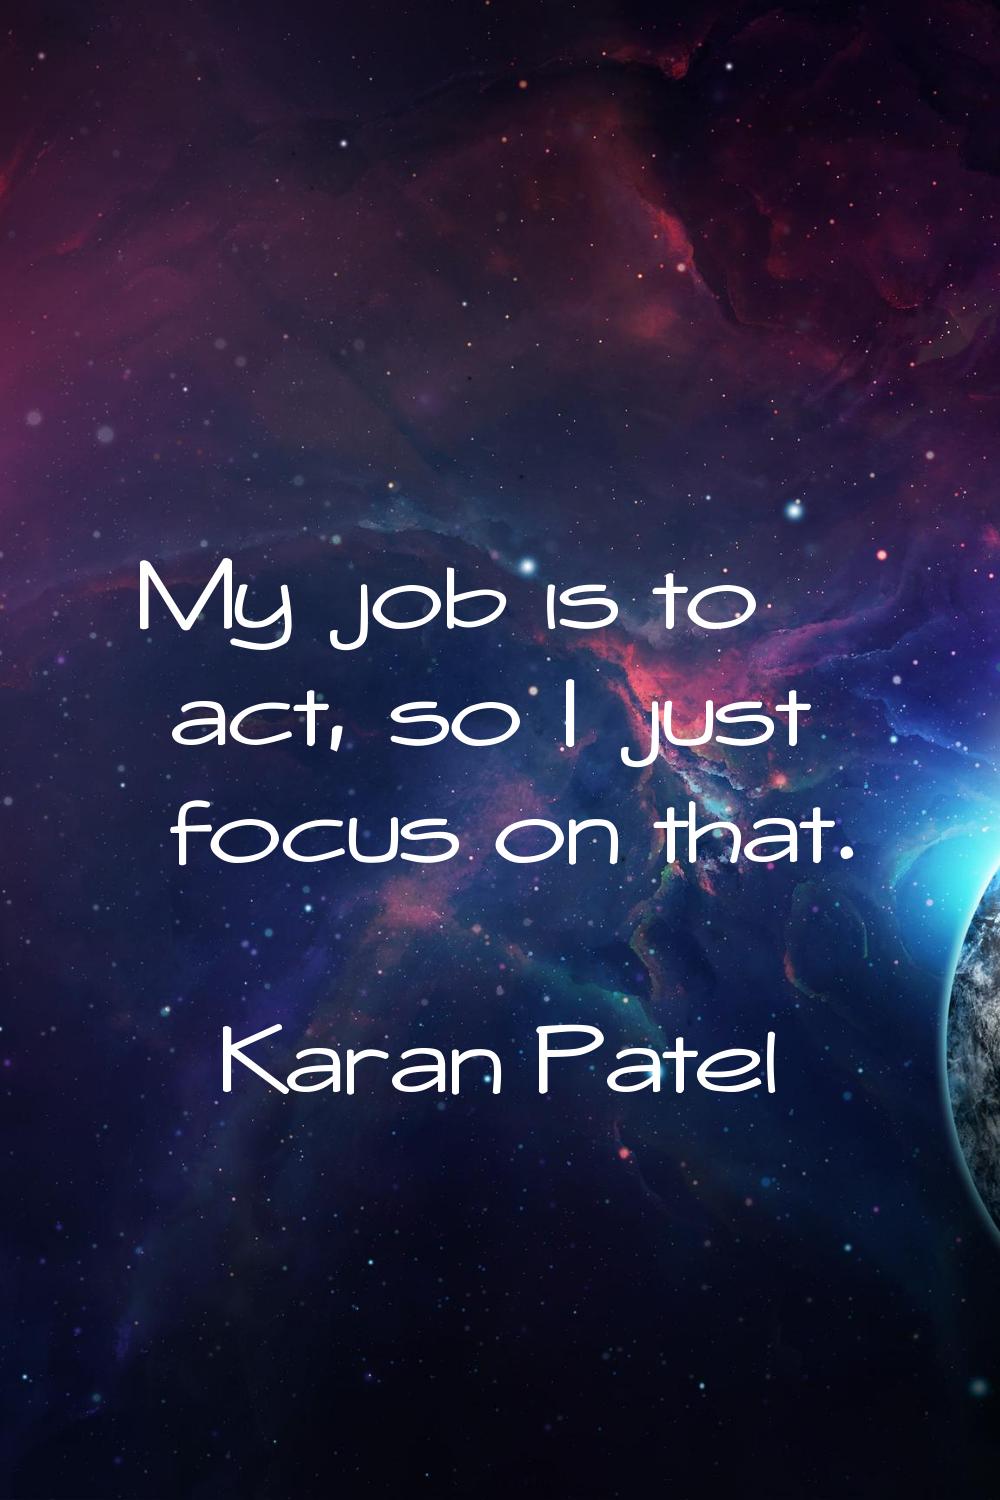 My job is to act, so I just focus on that.